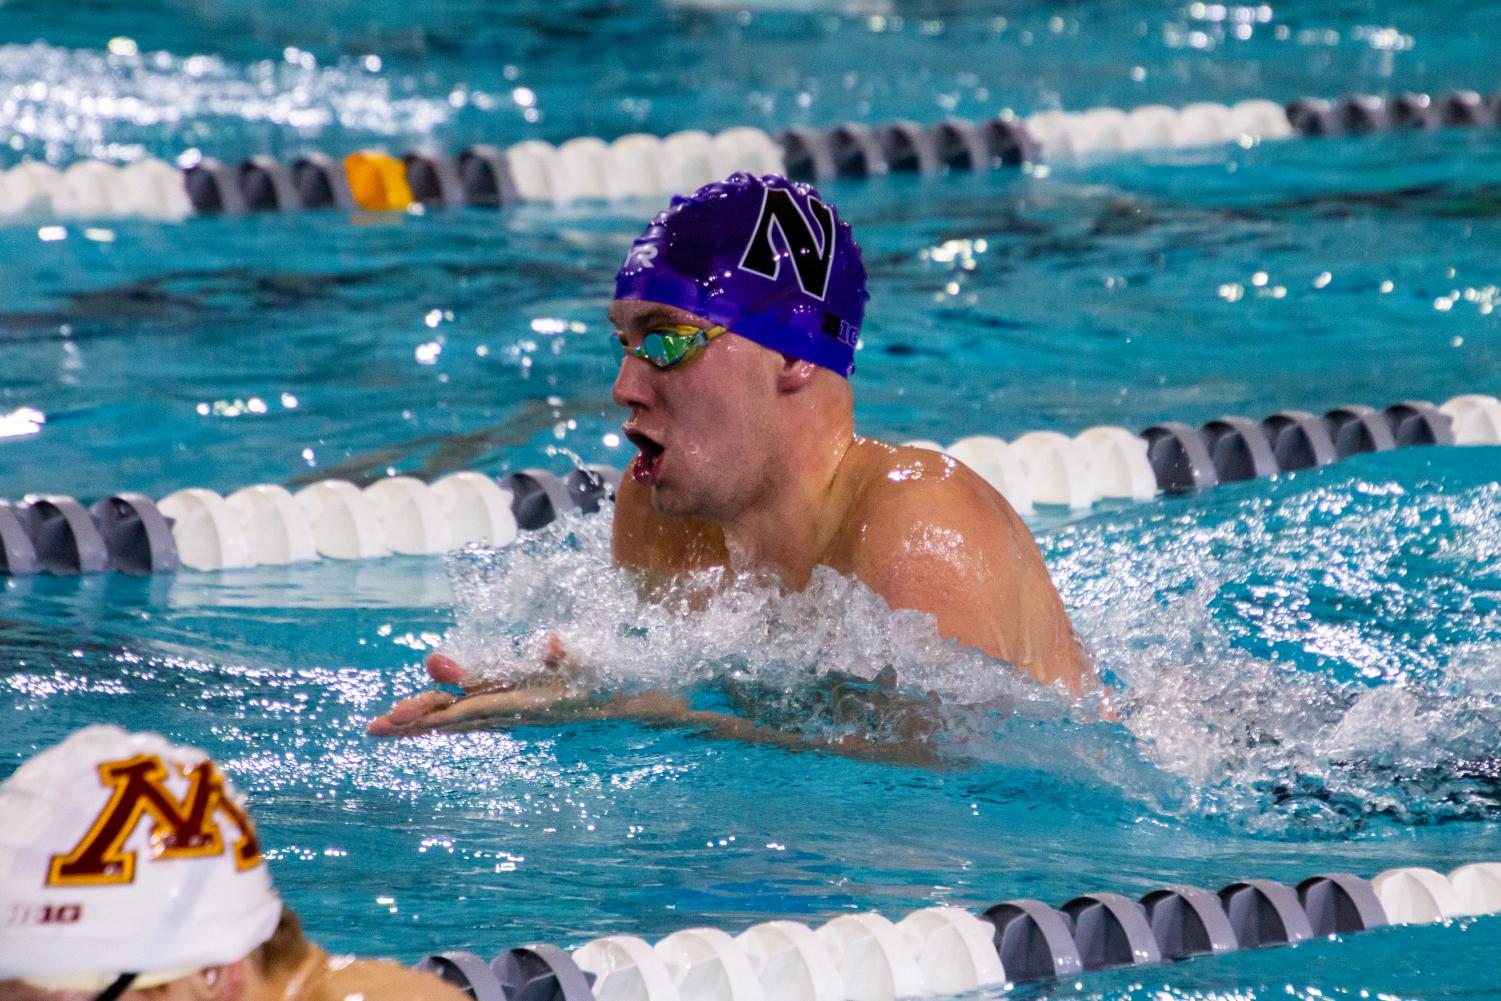 A swimmer with a purple cap comes up for a breath of air before going back into the water.